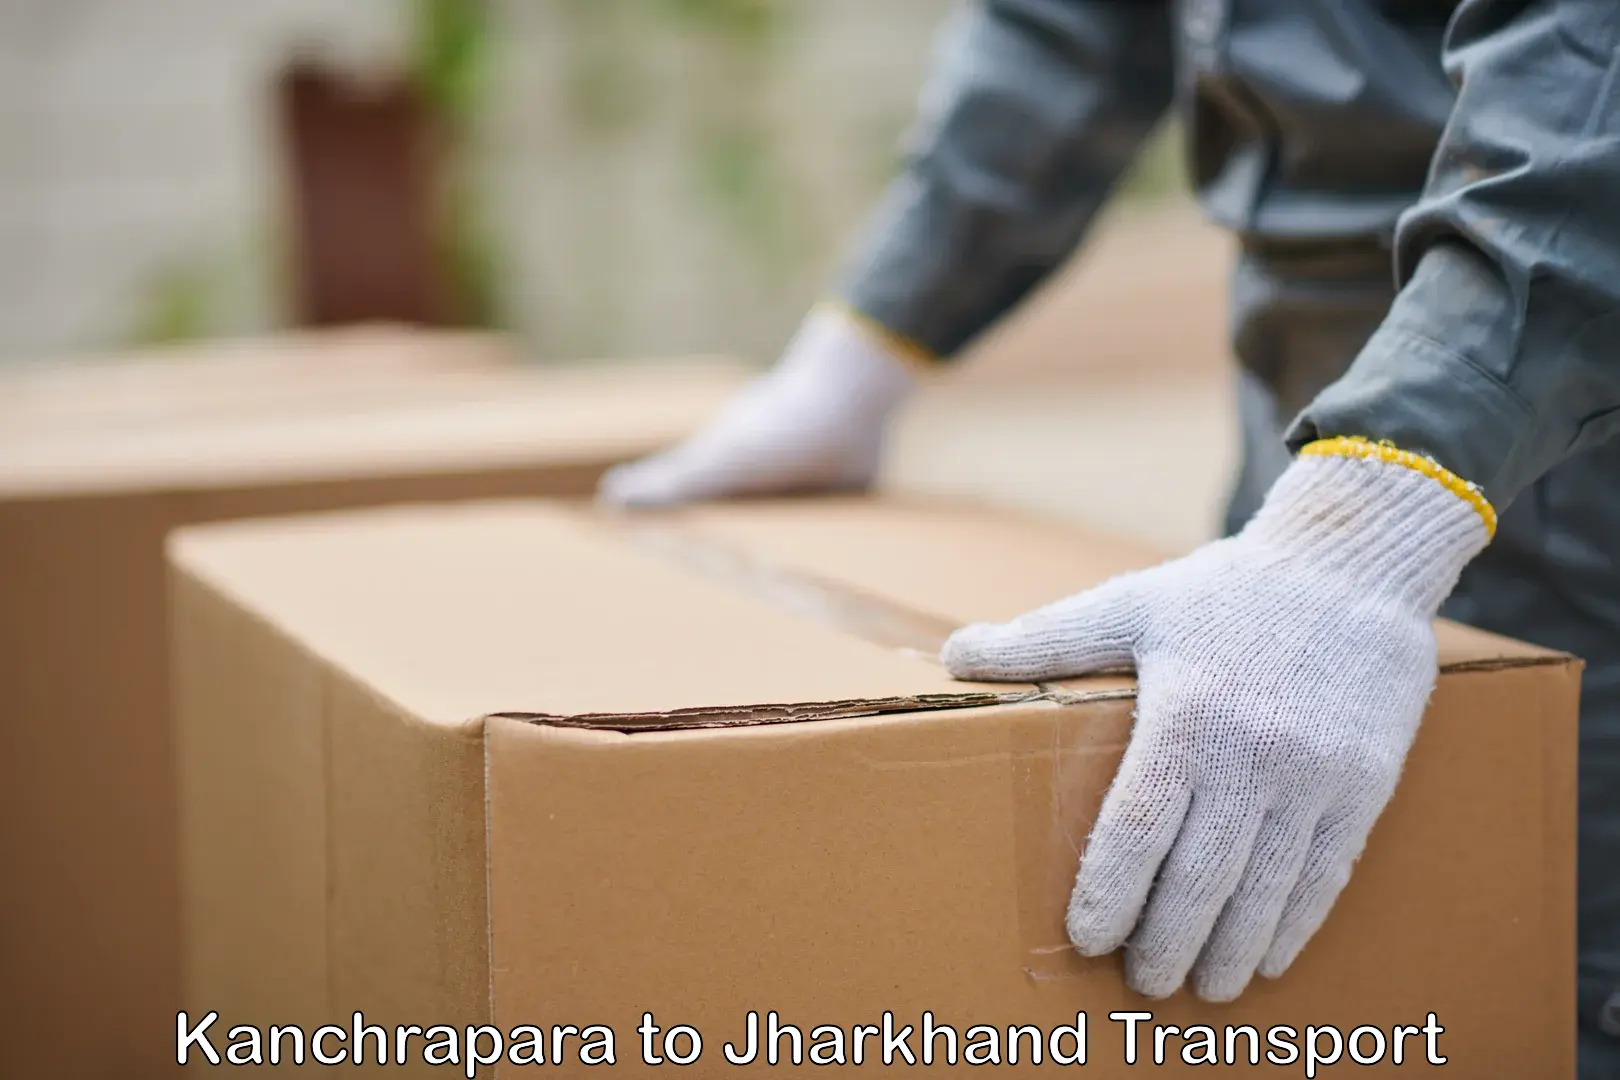 Delivery service Kanchrapara to Jharkhand